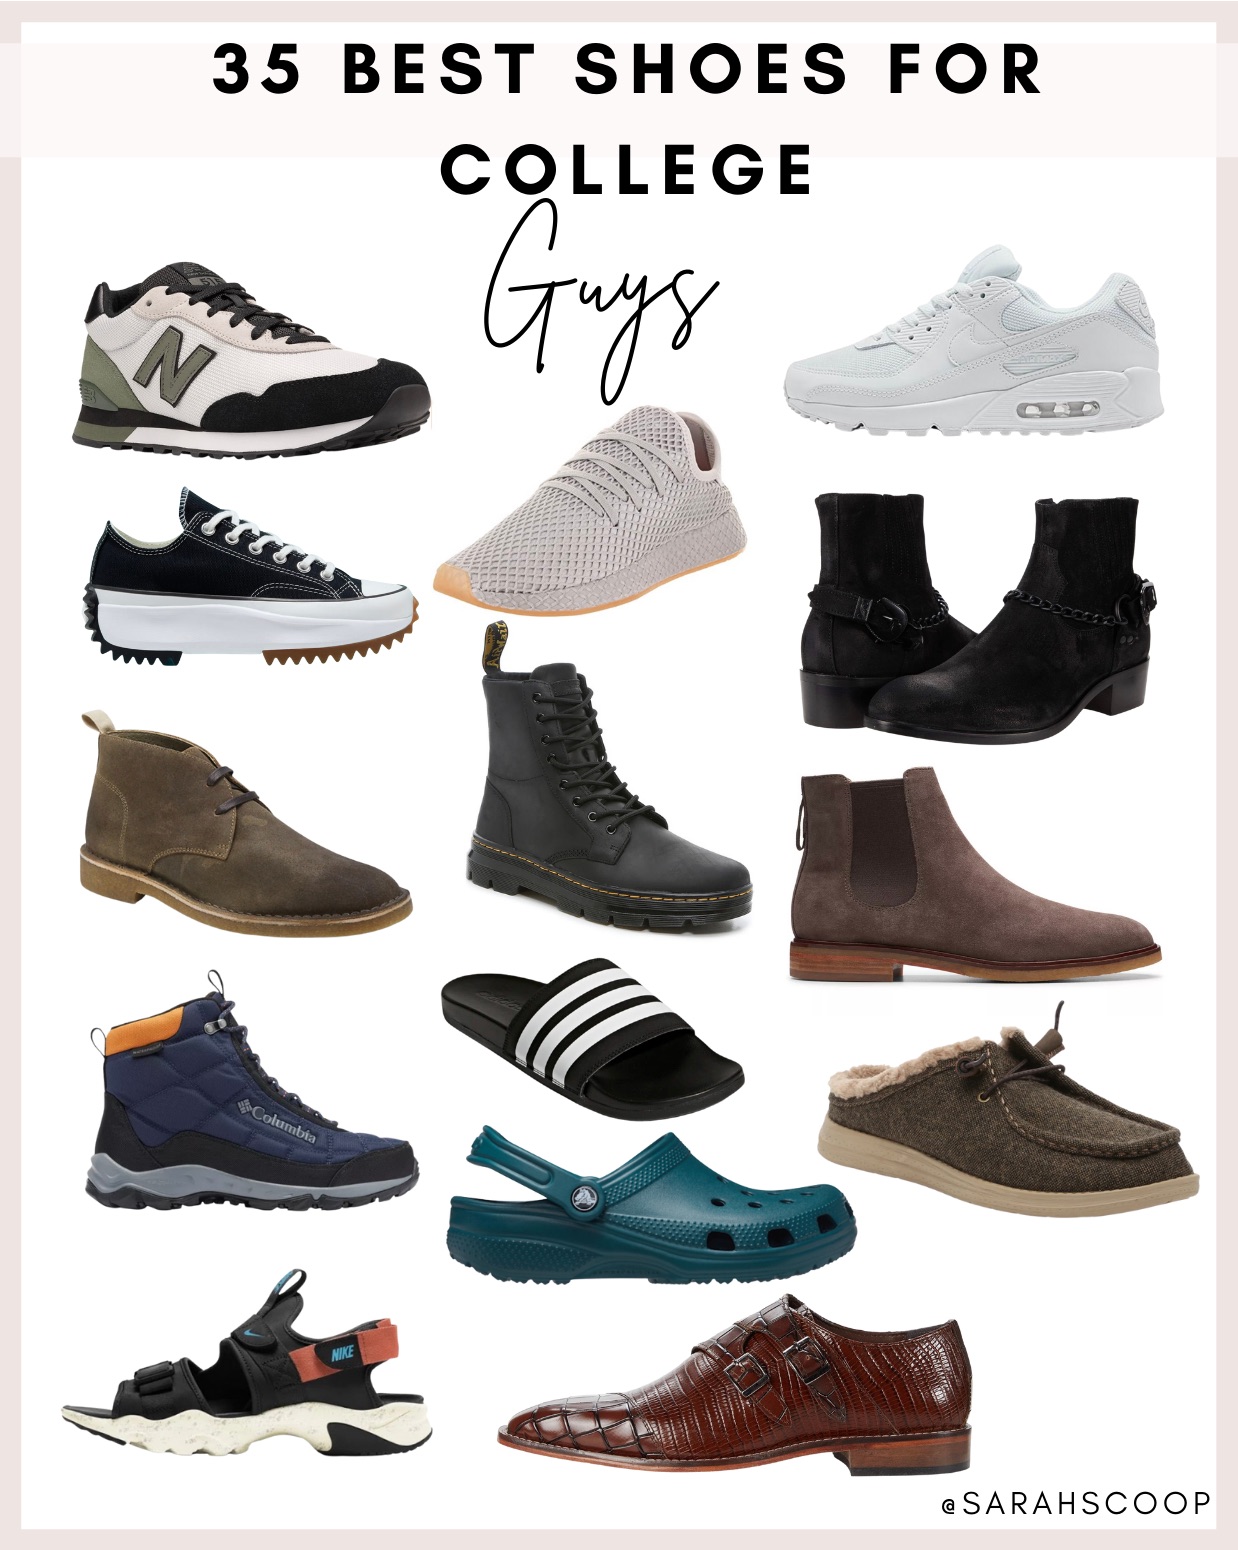 Best shoes for college boys